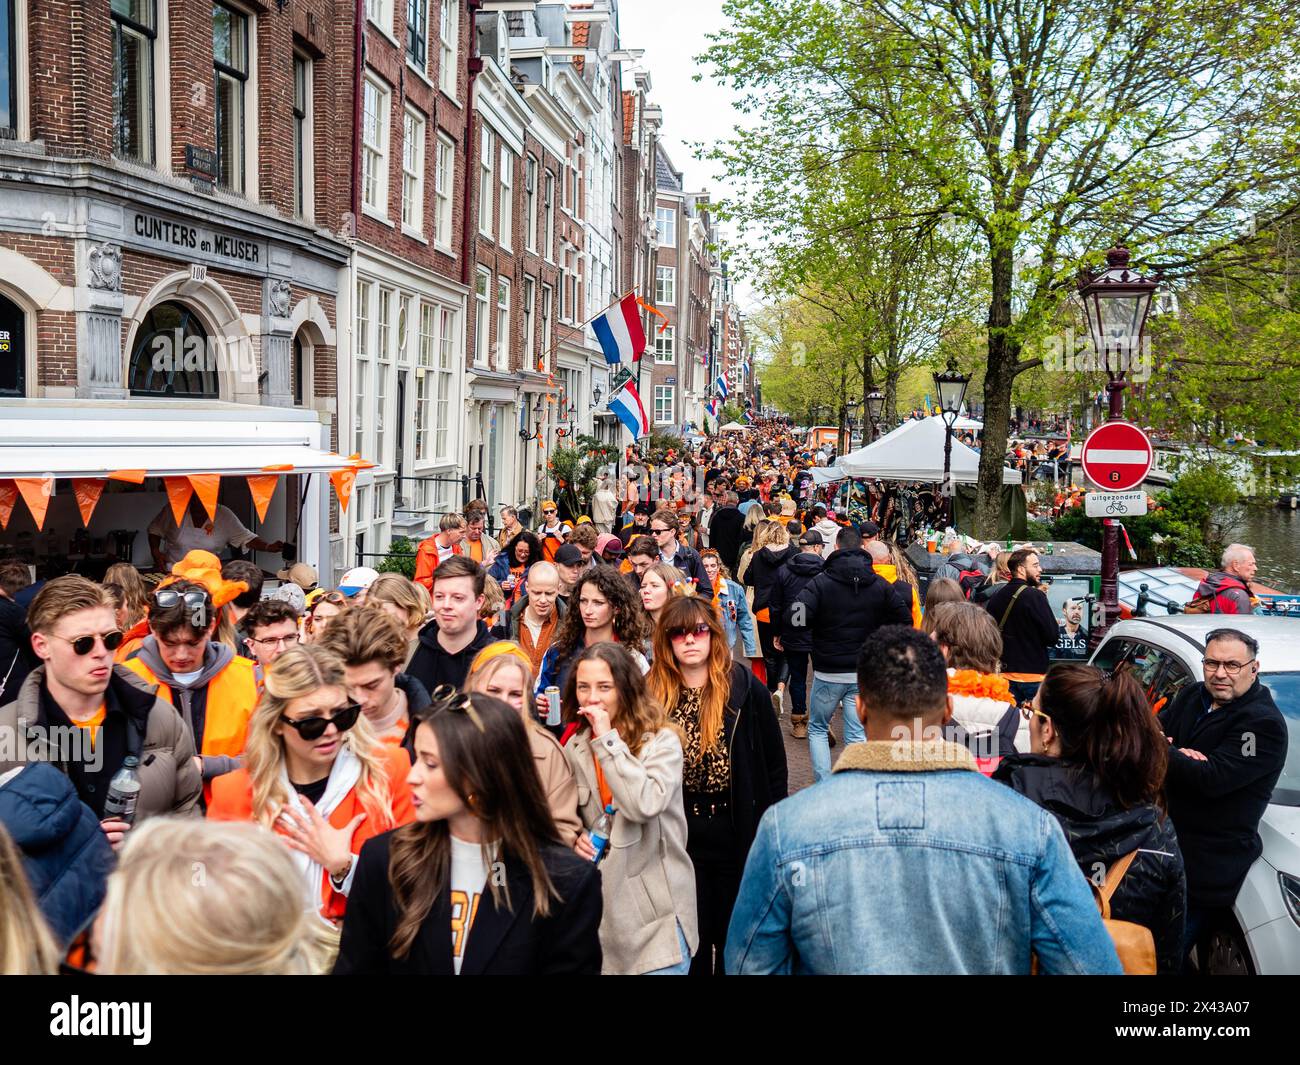 April 27th, Amsterdam. King's Day is renowned for being one of the biggest and most colorful festivities in the country, especially in Amsterdam. The city is bursting with orange as people enjoy the biggest street party of the year, enjoying the free markets and having fun on the boats along the canals. Stock Photo